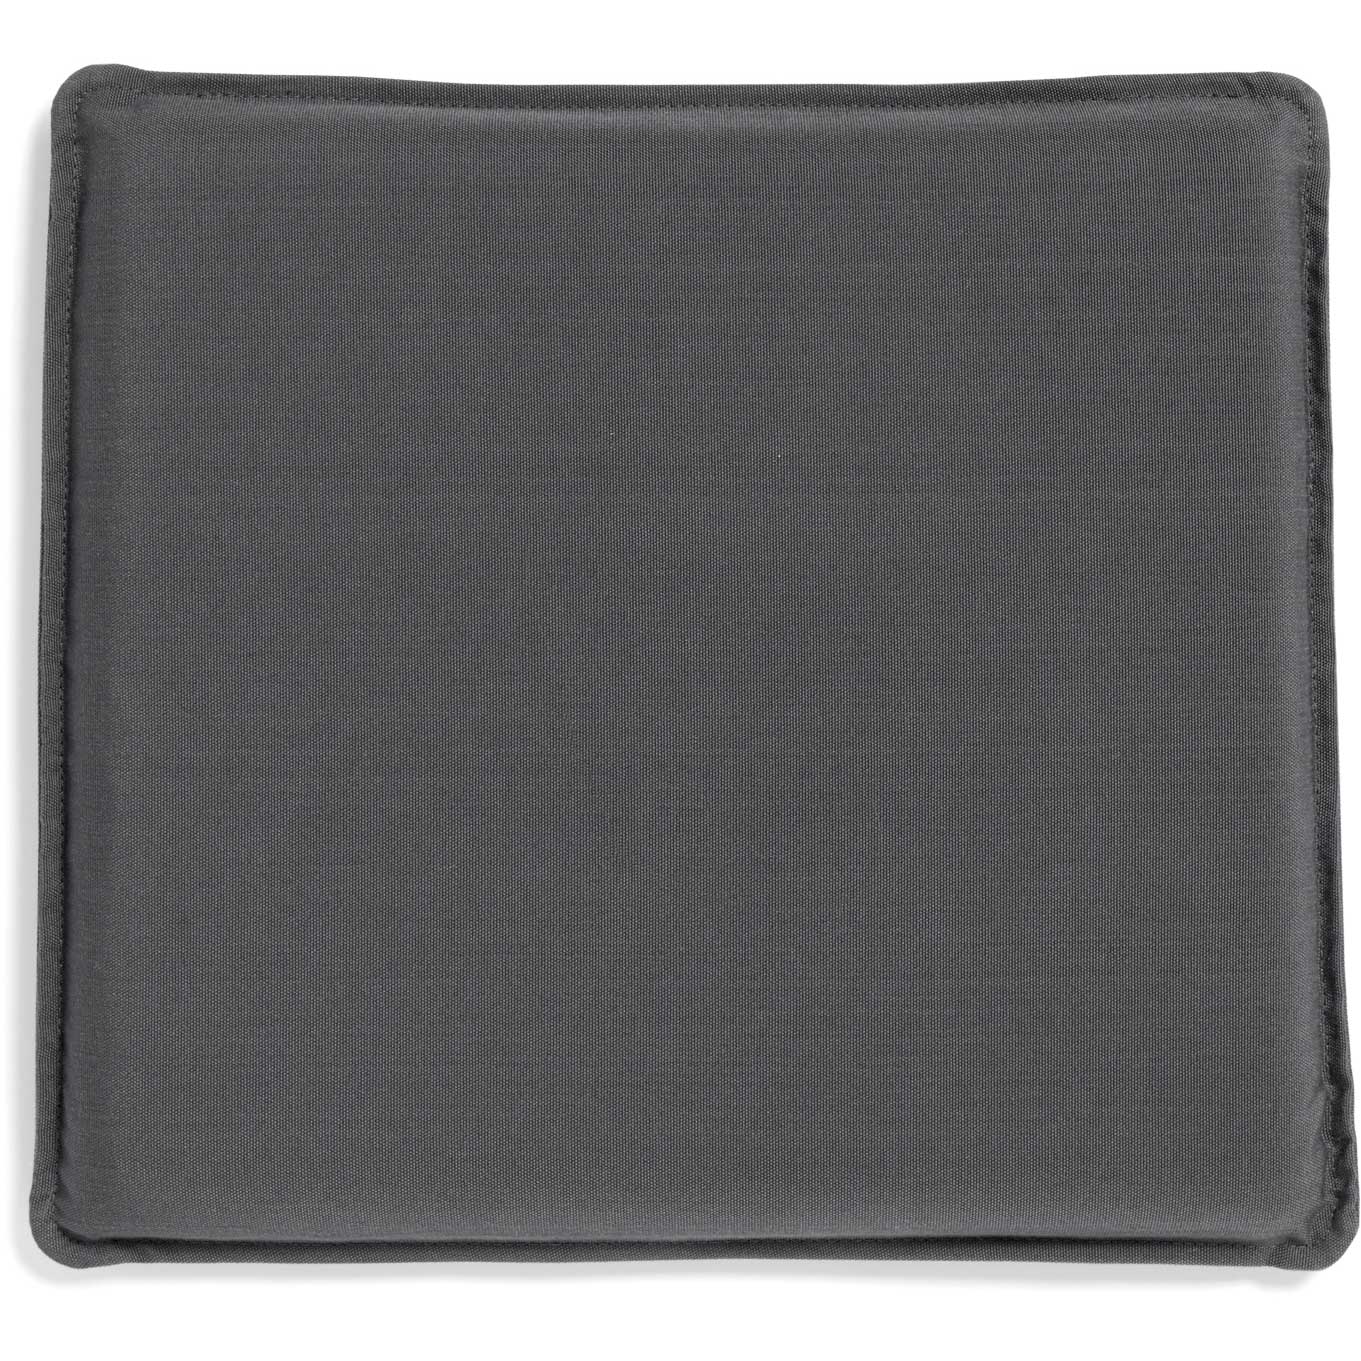 Hee Seat Cushion For Bar Stool, Anthracite